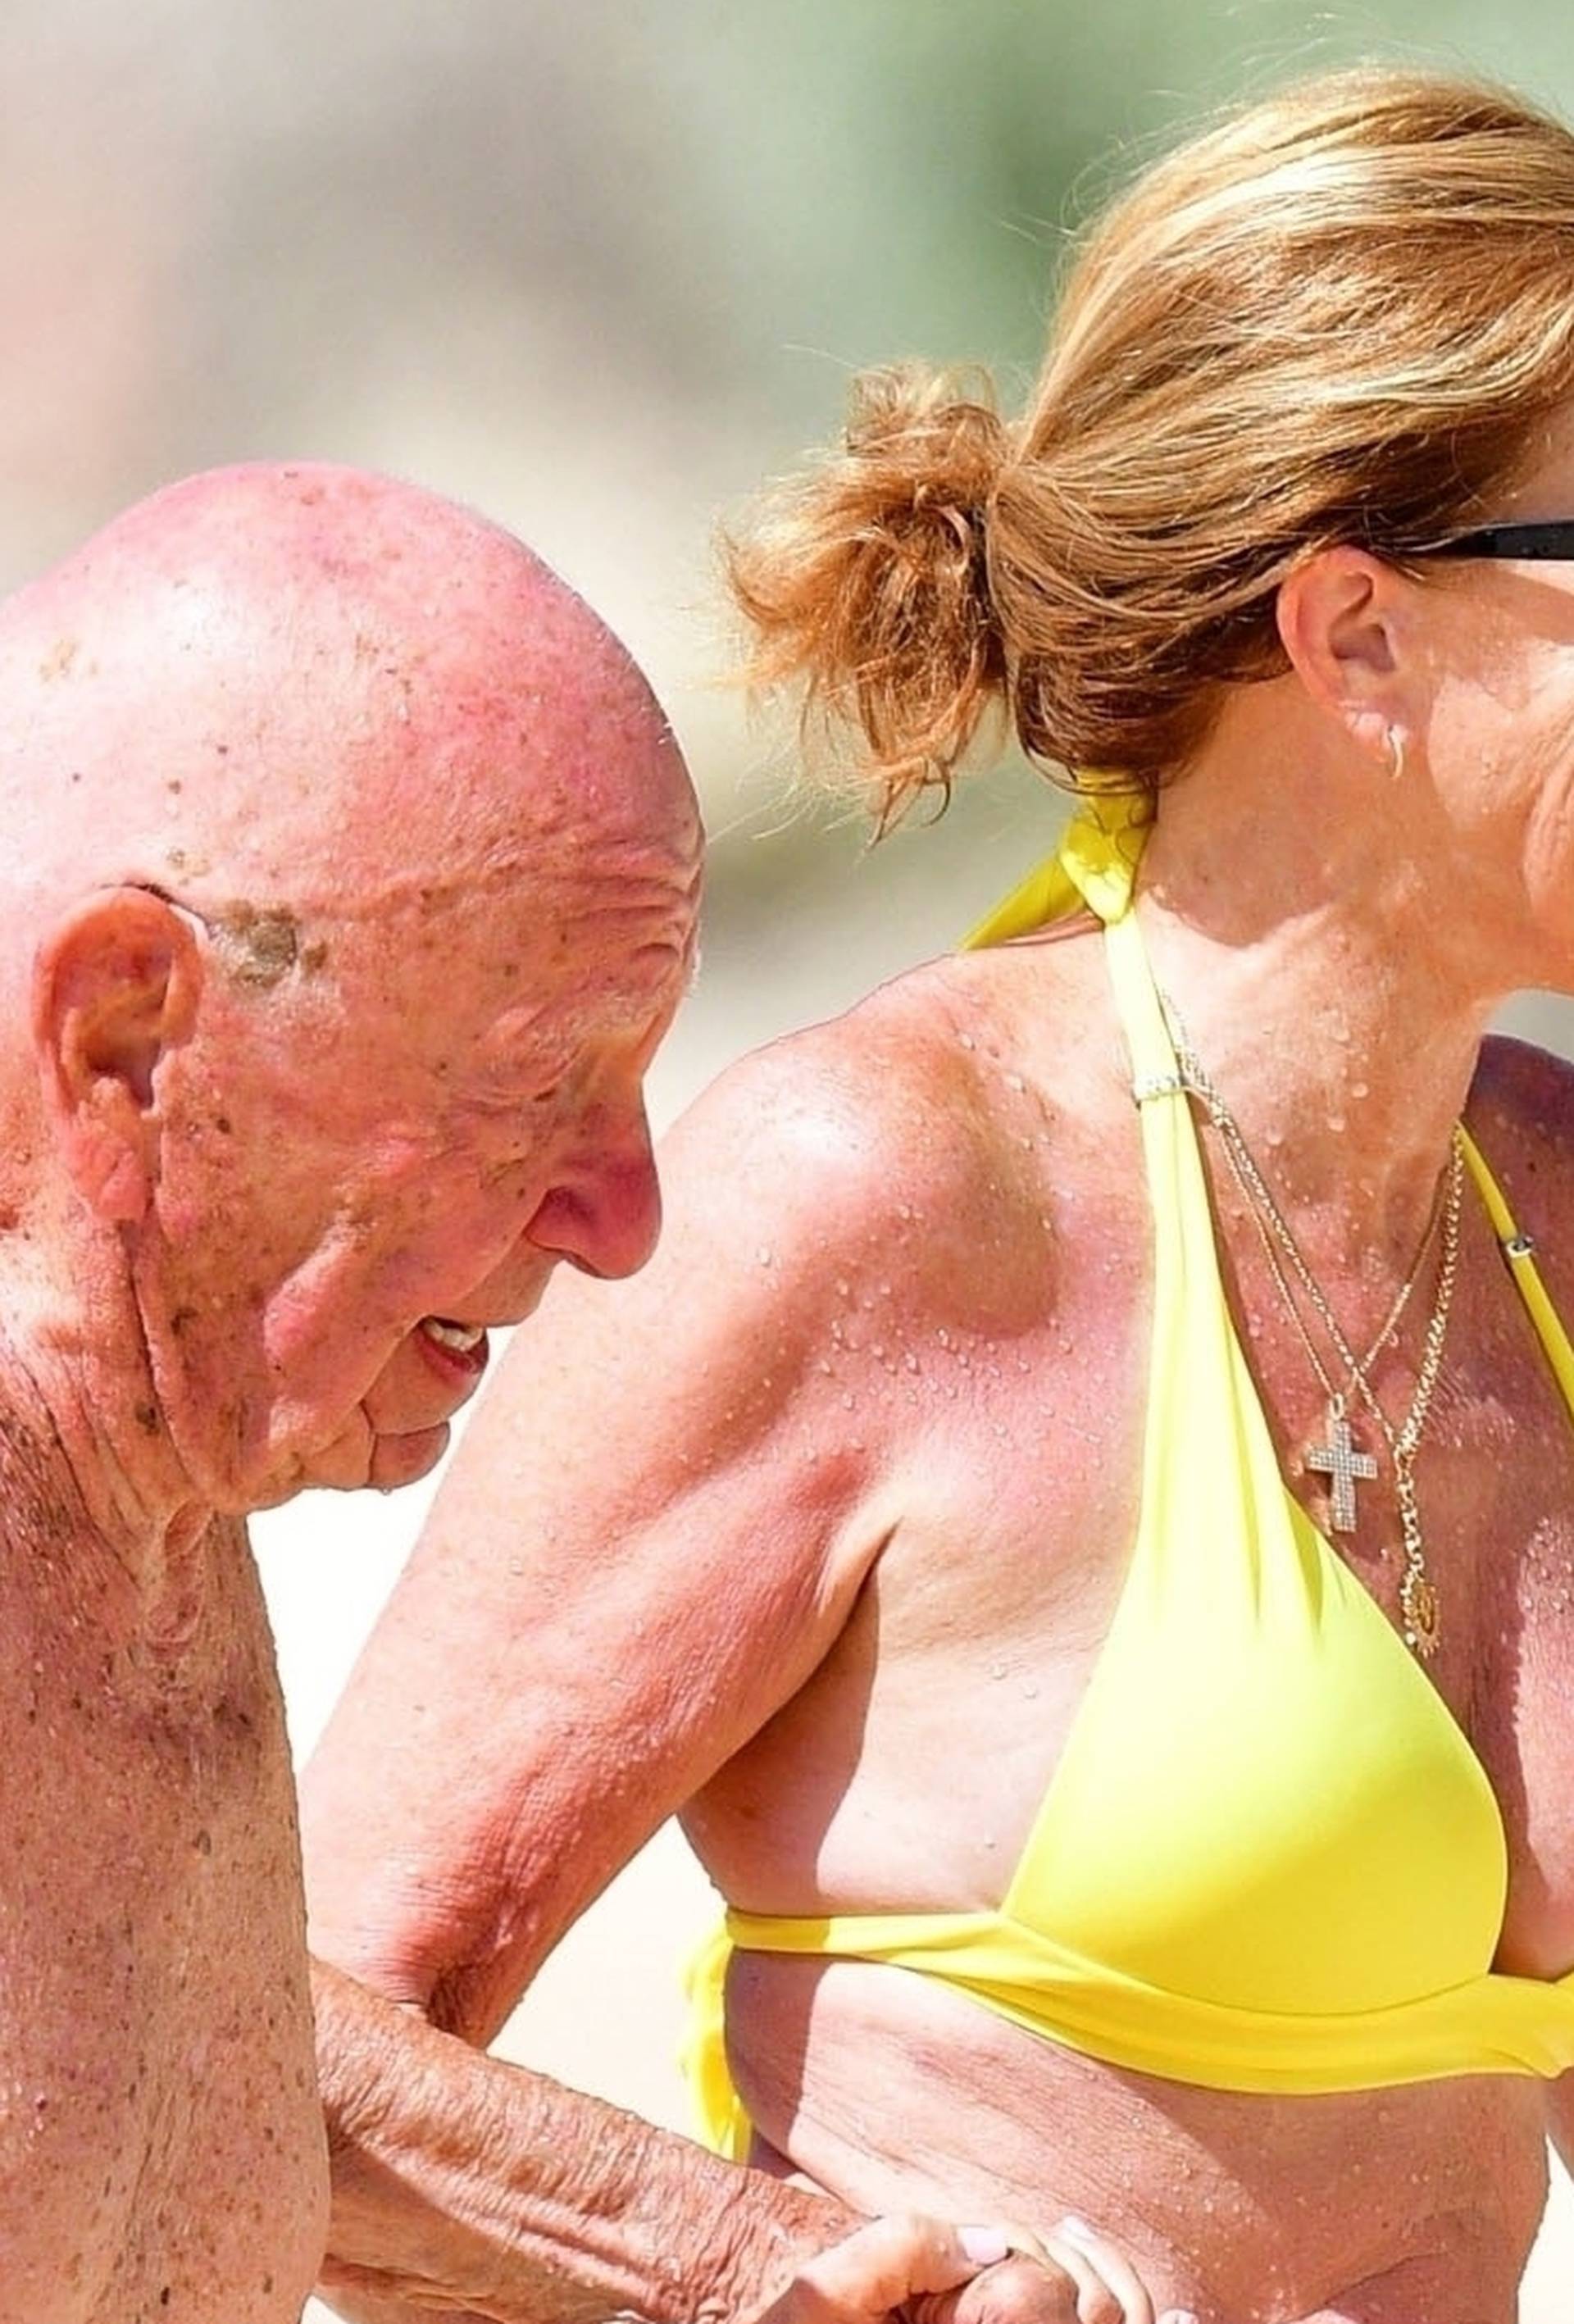 *PREMIUM-EXCLUSIVE* *MUST CALL FOR PRICING* The Australian-American business magnate Rupert Murdoch laps up the hot Caribbean sunshine with his scantily-clad mystery woman and billionaire pal Anthony Bamford out on the beaches of Barbados.